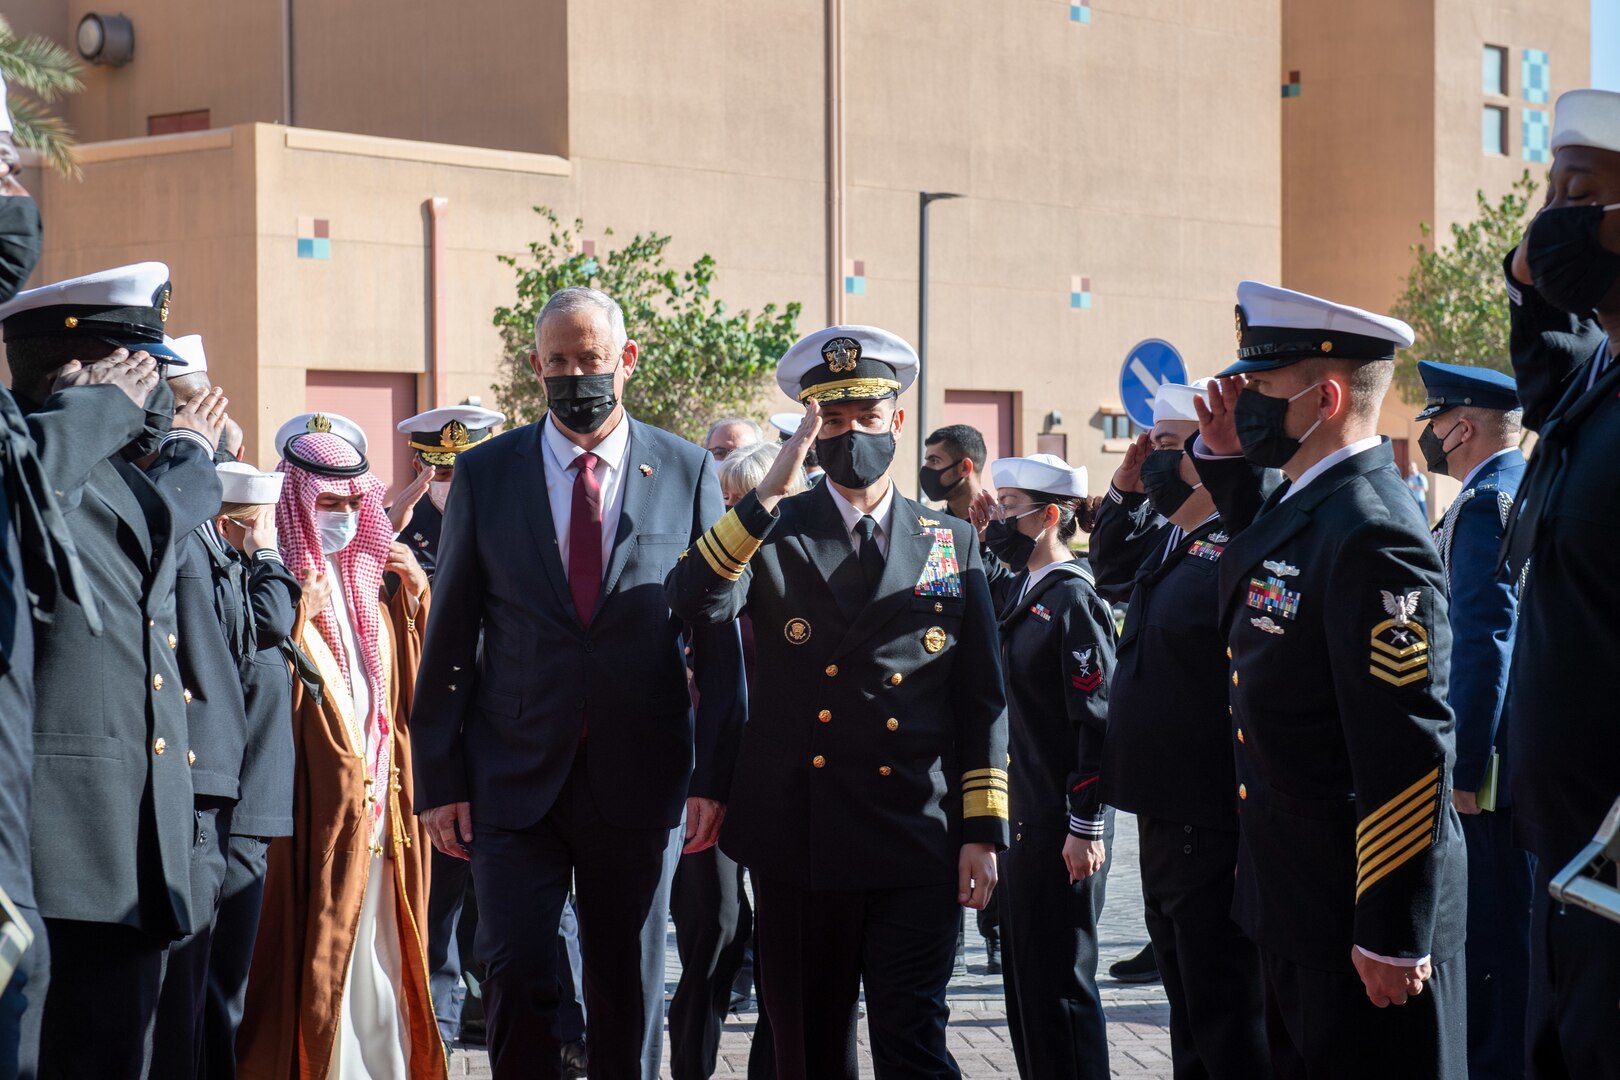 MANAMA, Bahrain (Feb. 3, 2022) Vice Adm. Brad Cooper, commander of U.S. Naval Forces Central Command, U.S. 5th Fleet and Combined Maritime Forces, center right, arrives with Israel Minister of Defense H.E. Benjamin Gantz and Bahrain Minister of Defense Affairs Abdulla bin Hasan Al Noaimi to U.S. 5th Fleet headquarters in Bahrain, Feb. 3. Cooper welcomed senior government officials from the United States, Bahrain and Israel for a trilateral meeting on regional maritime security cooperation. (U.S. Navy photo by Mass Communication Specialist 2nd Class Dawson Roth)